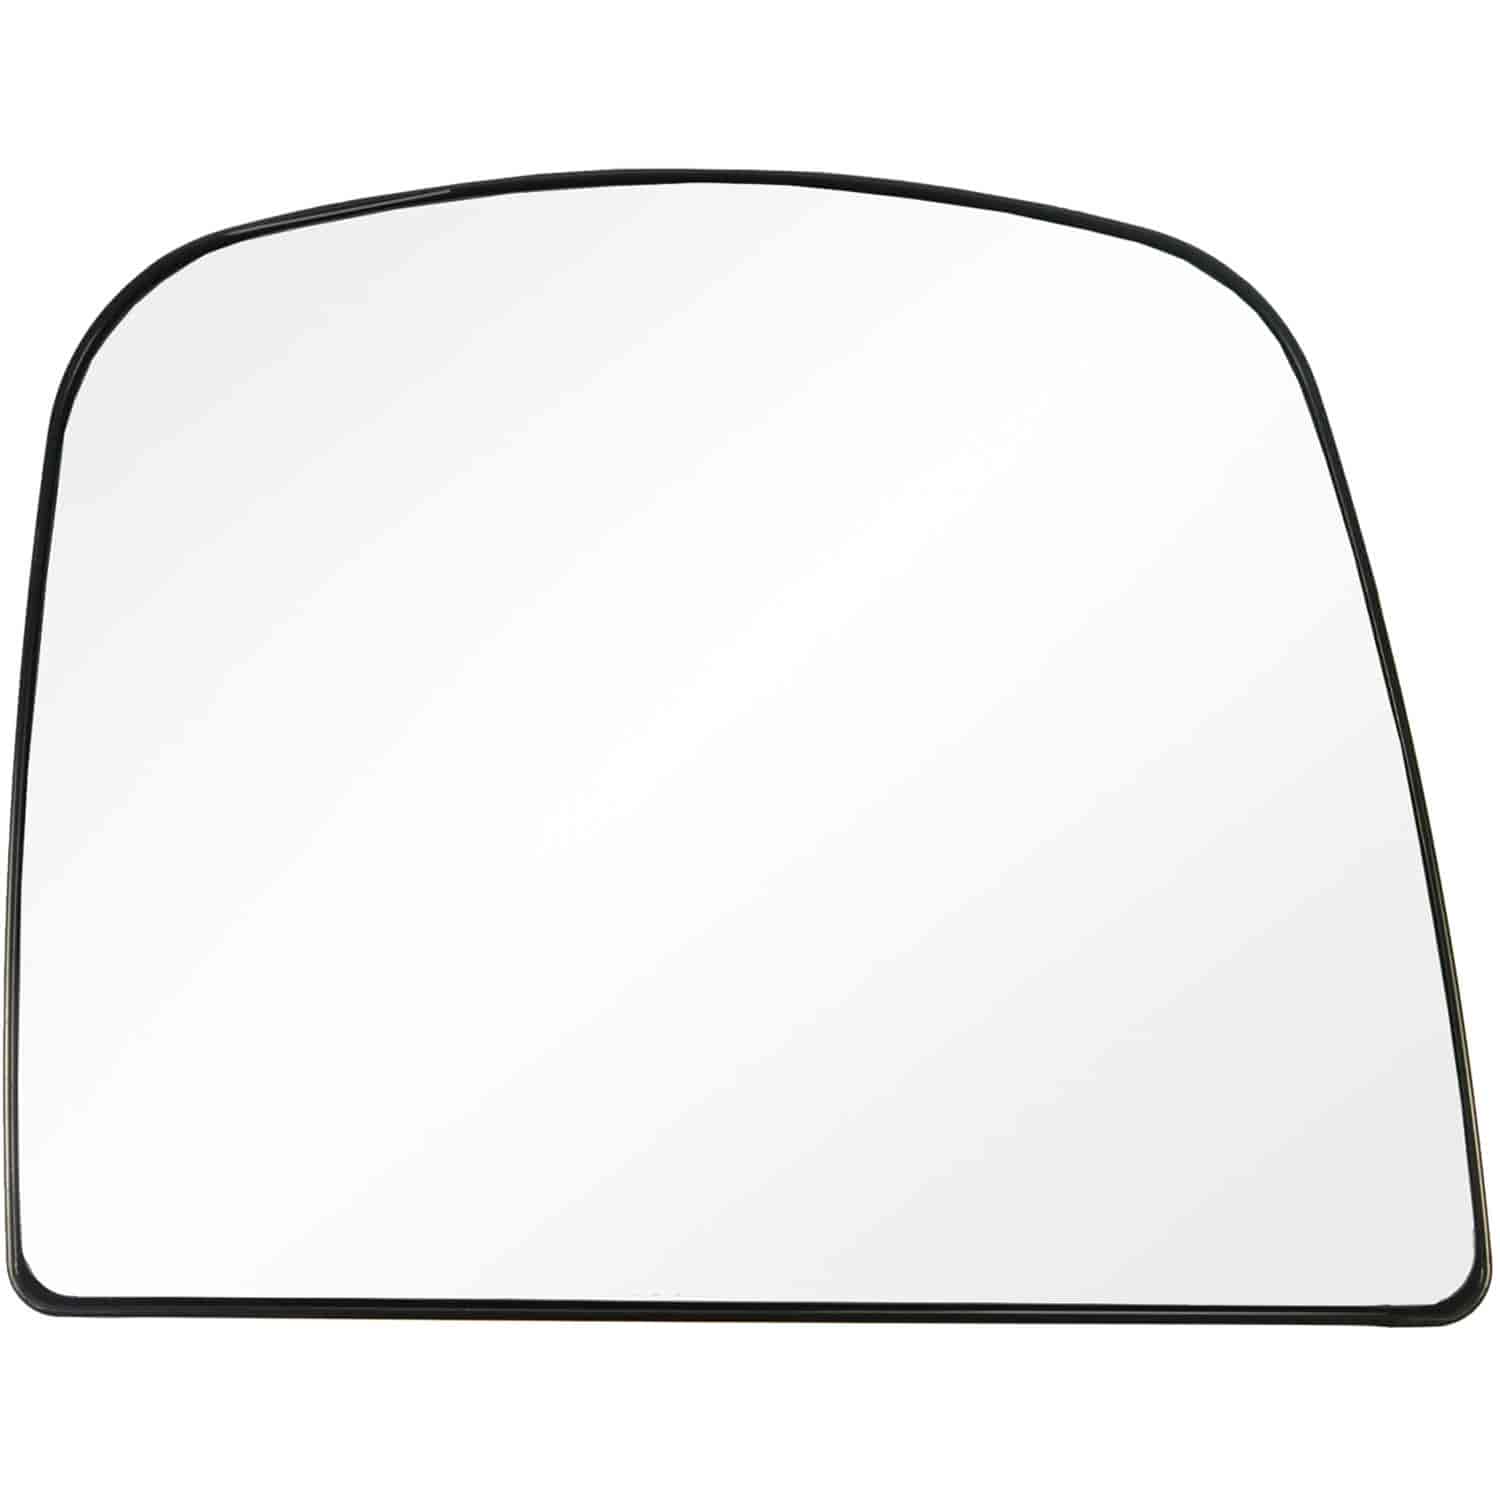 Replacement Glass Assembly for 08-14 Express Full Size Van top lens; 08-14 Savana Full Size Van top